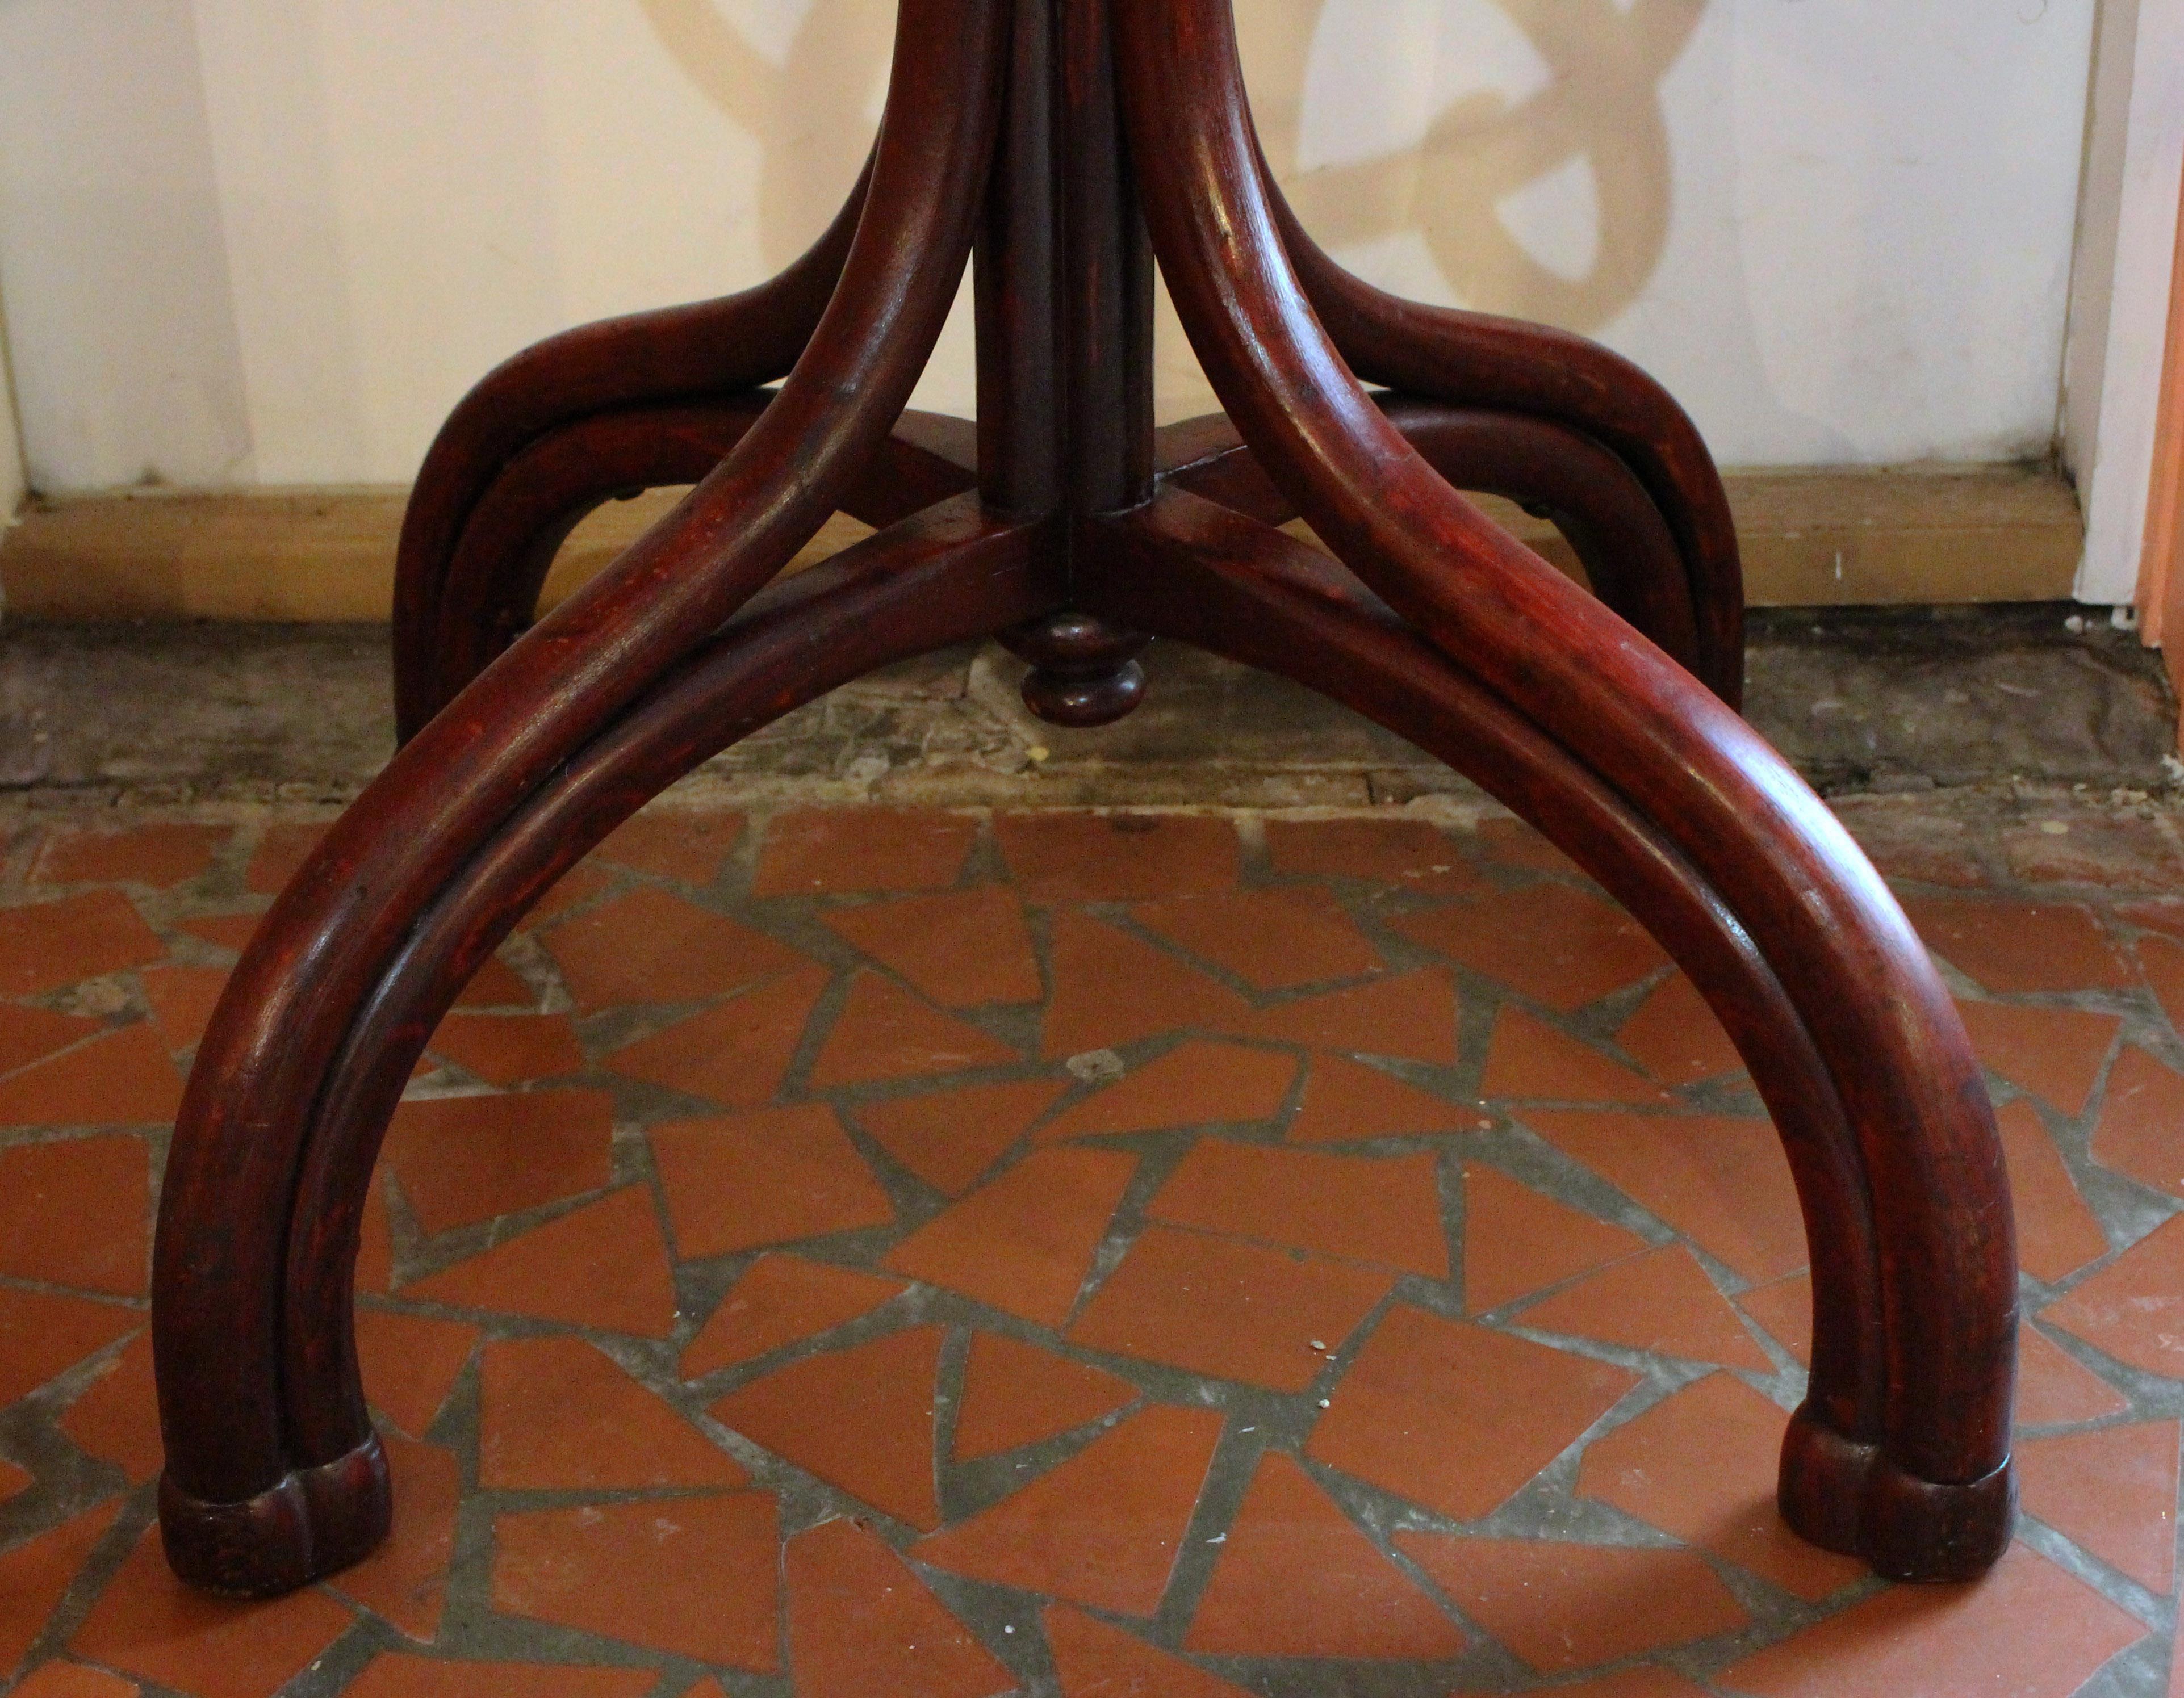 20th Century French c. 1900 Art Nouveau Bentwood Hall Tree For Sale